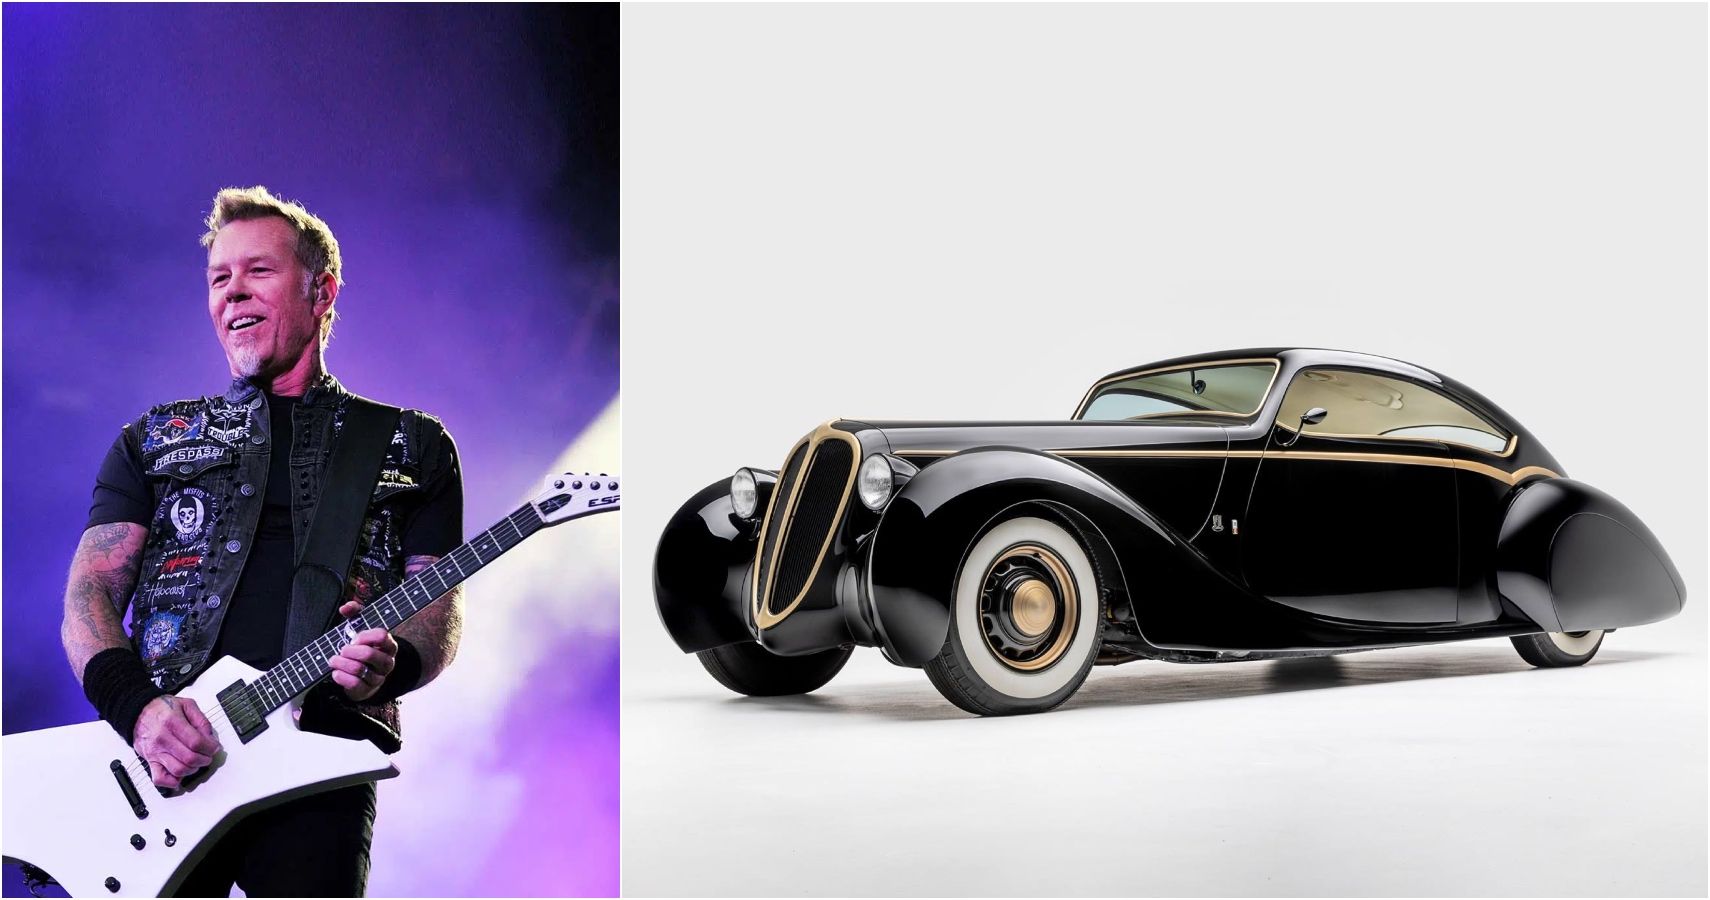 Metallica Frontman James Hetfield’s Car Collection Is As Incredible As The Rock Icon